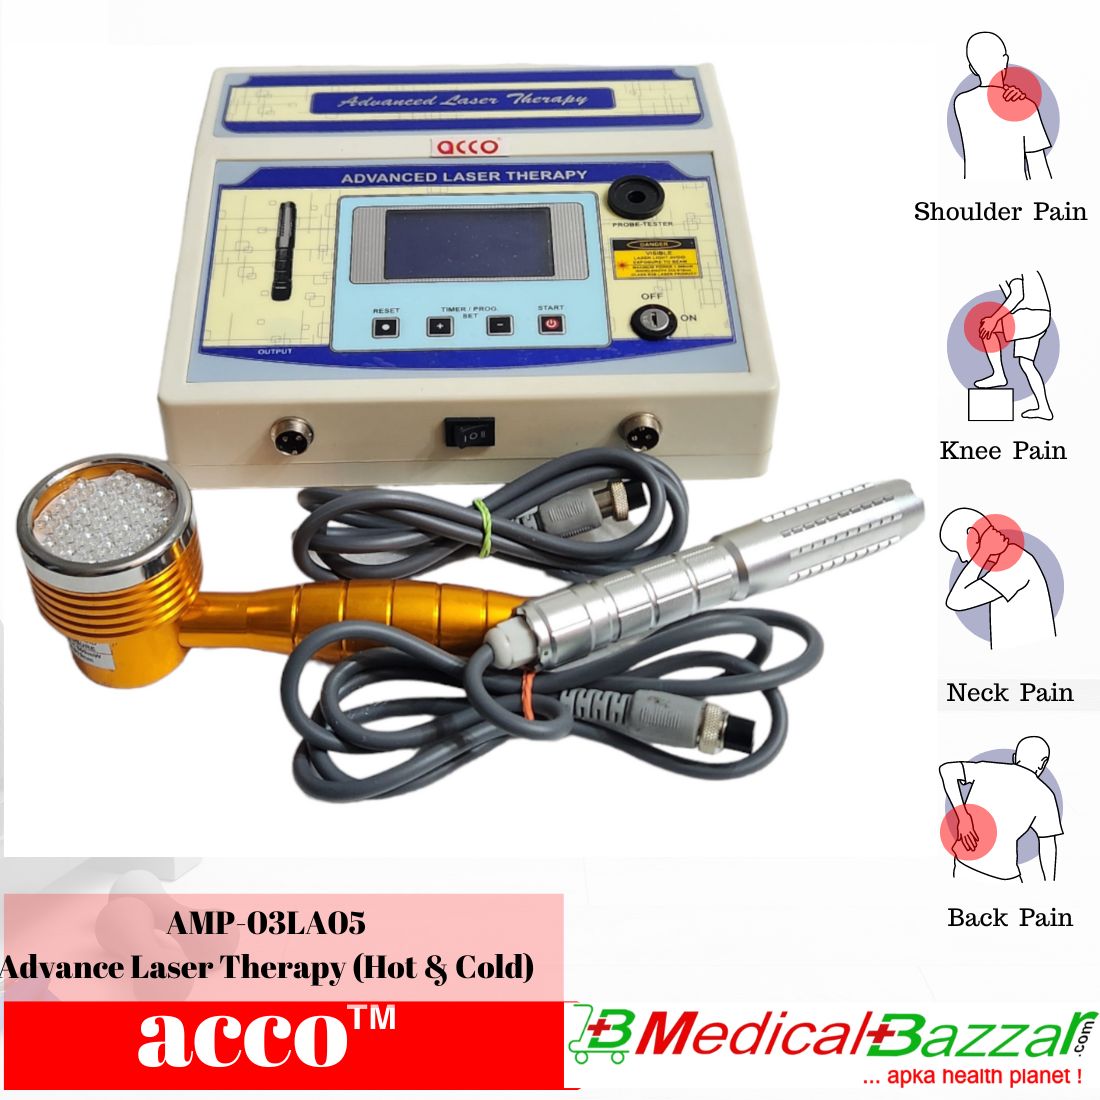 acco Advance Laser Therapy Unit (Hot & Cold) with 2 Probes